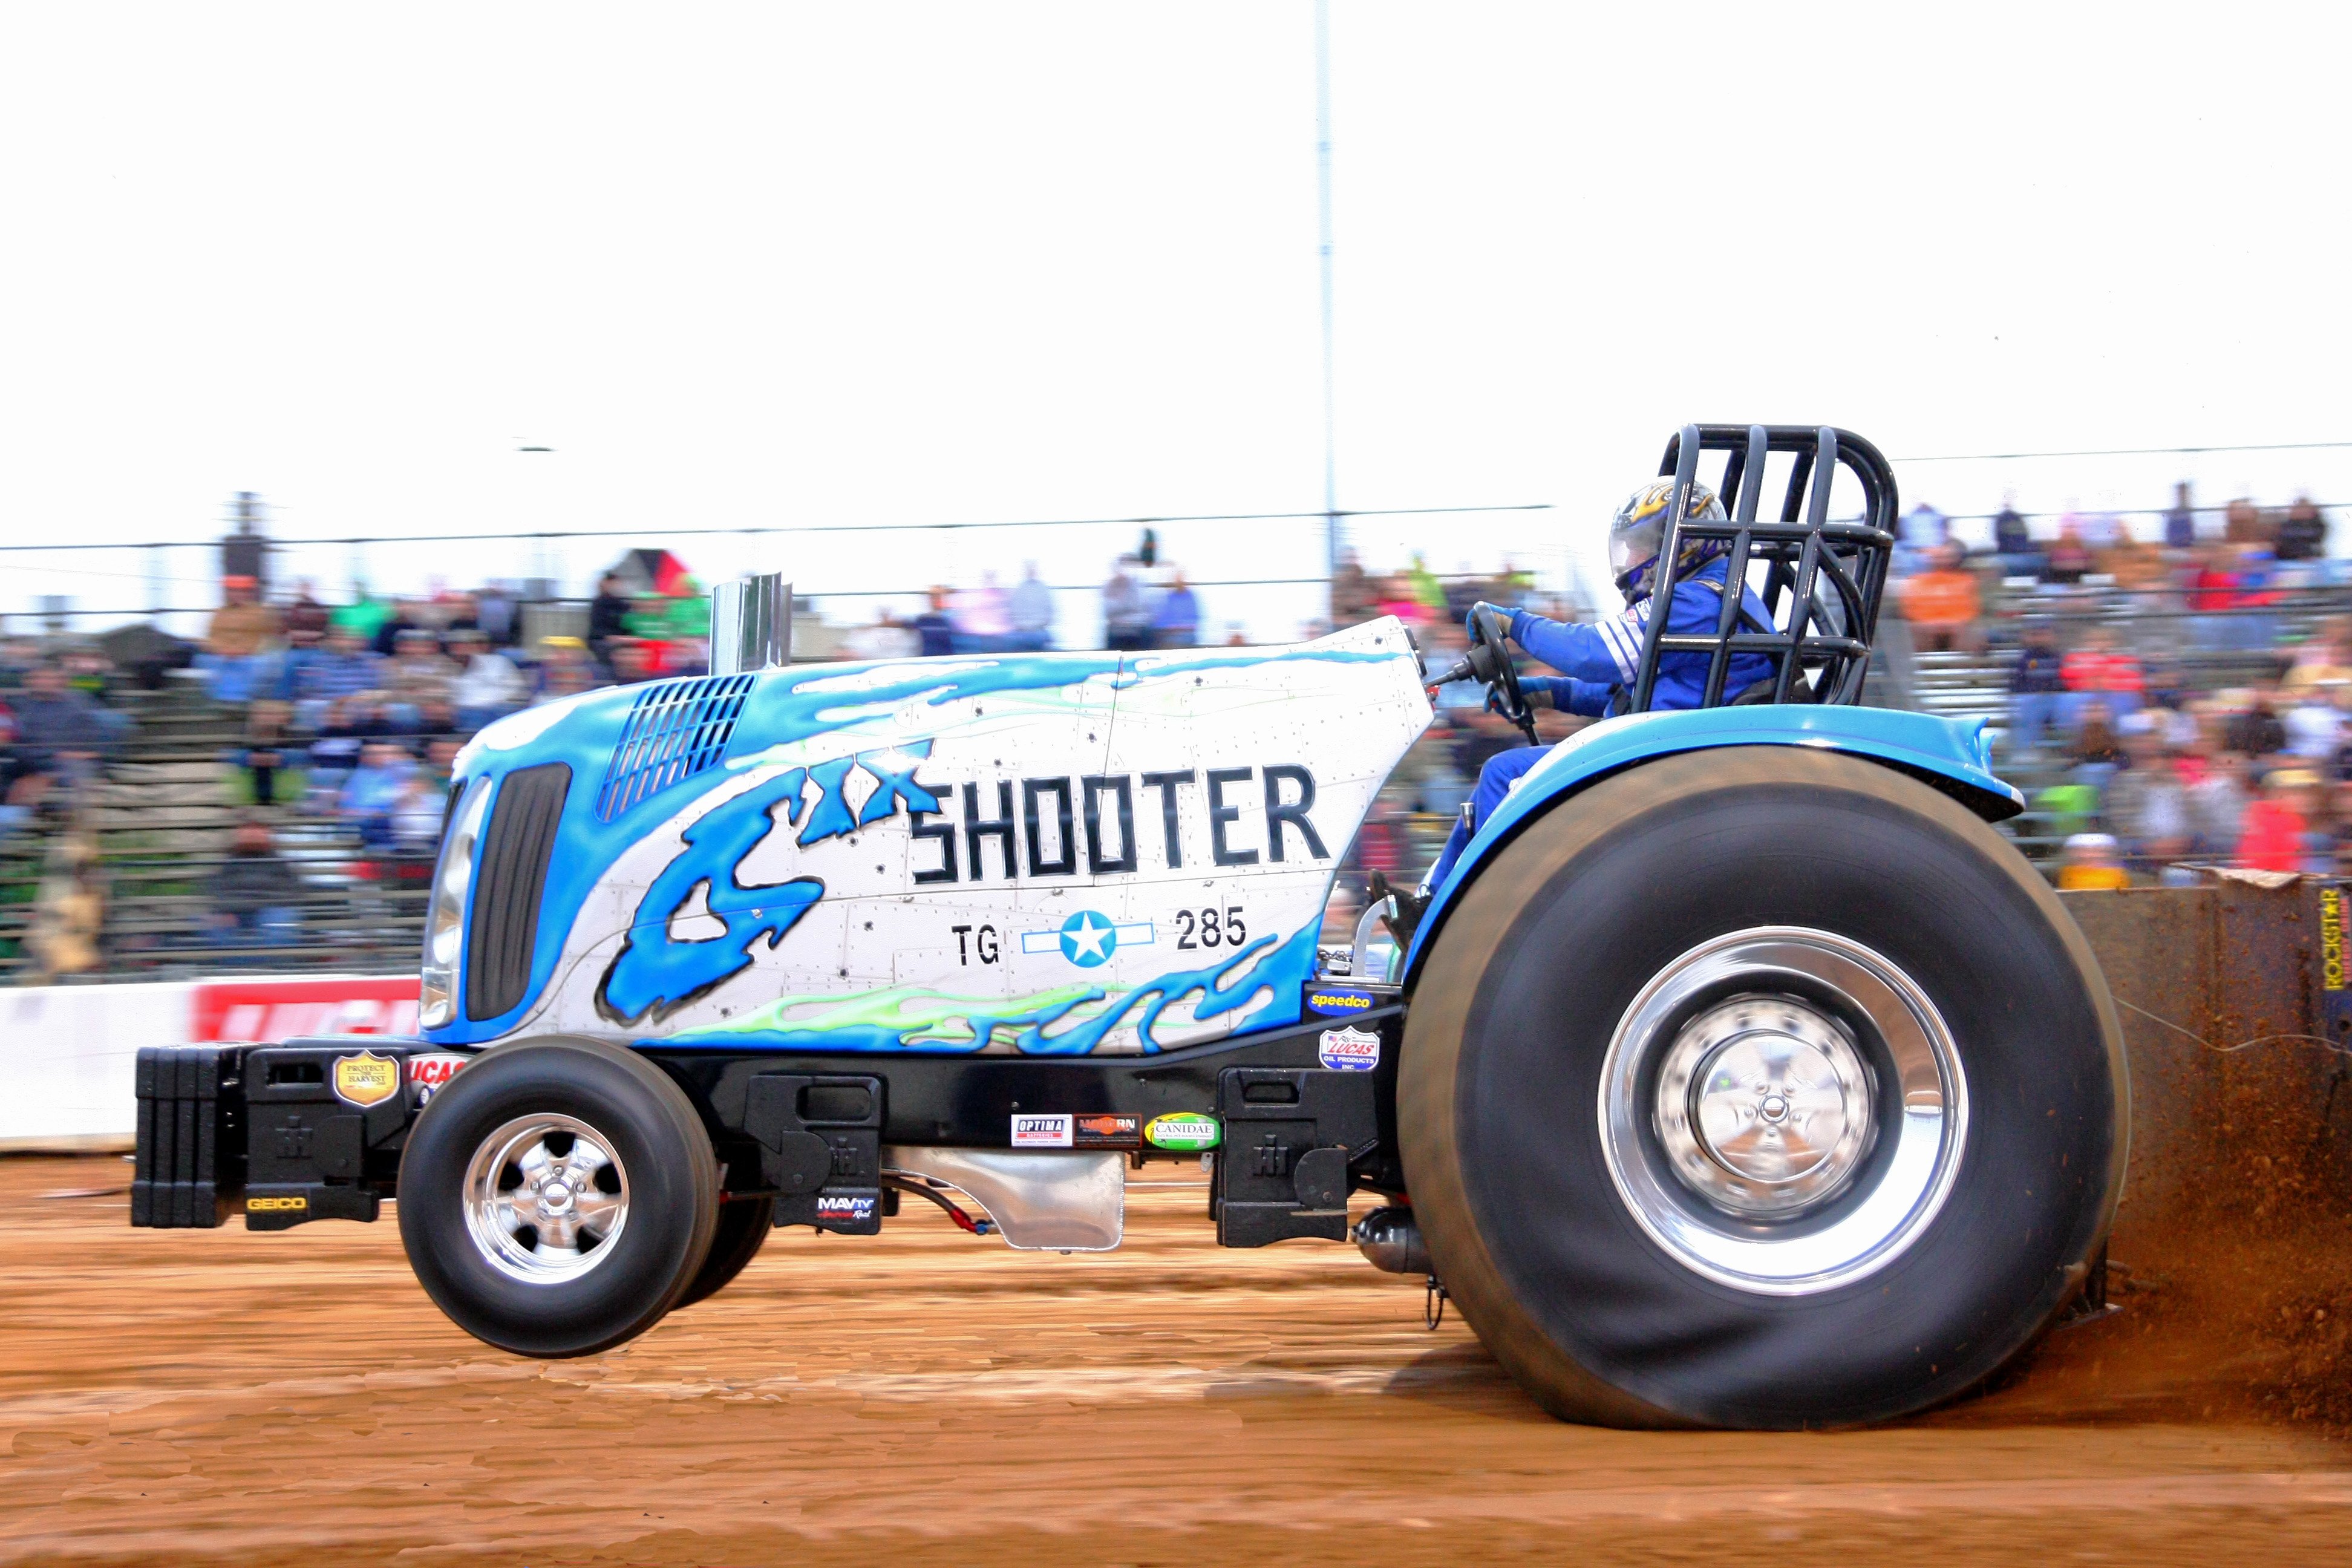 tractor pulling, Race, Racing, Hot, Rod, Rods, Tractor Wallpaper